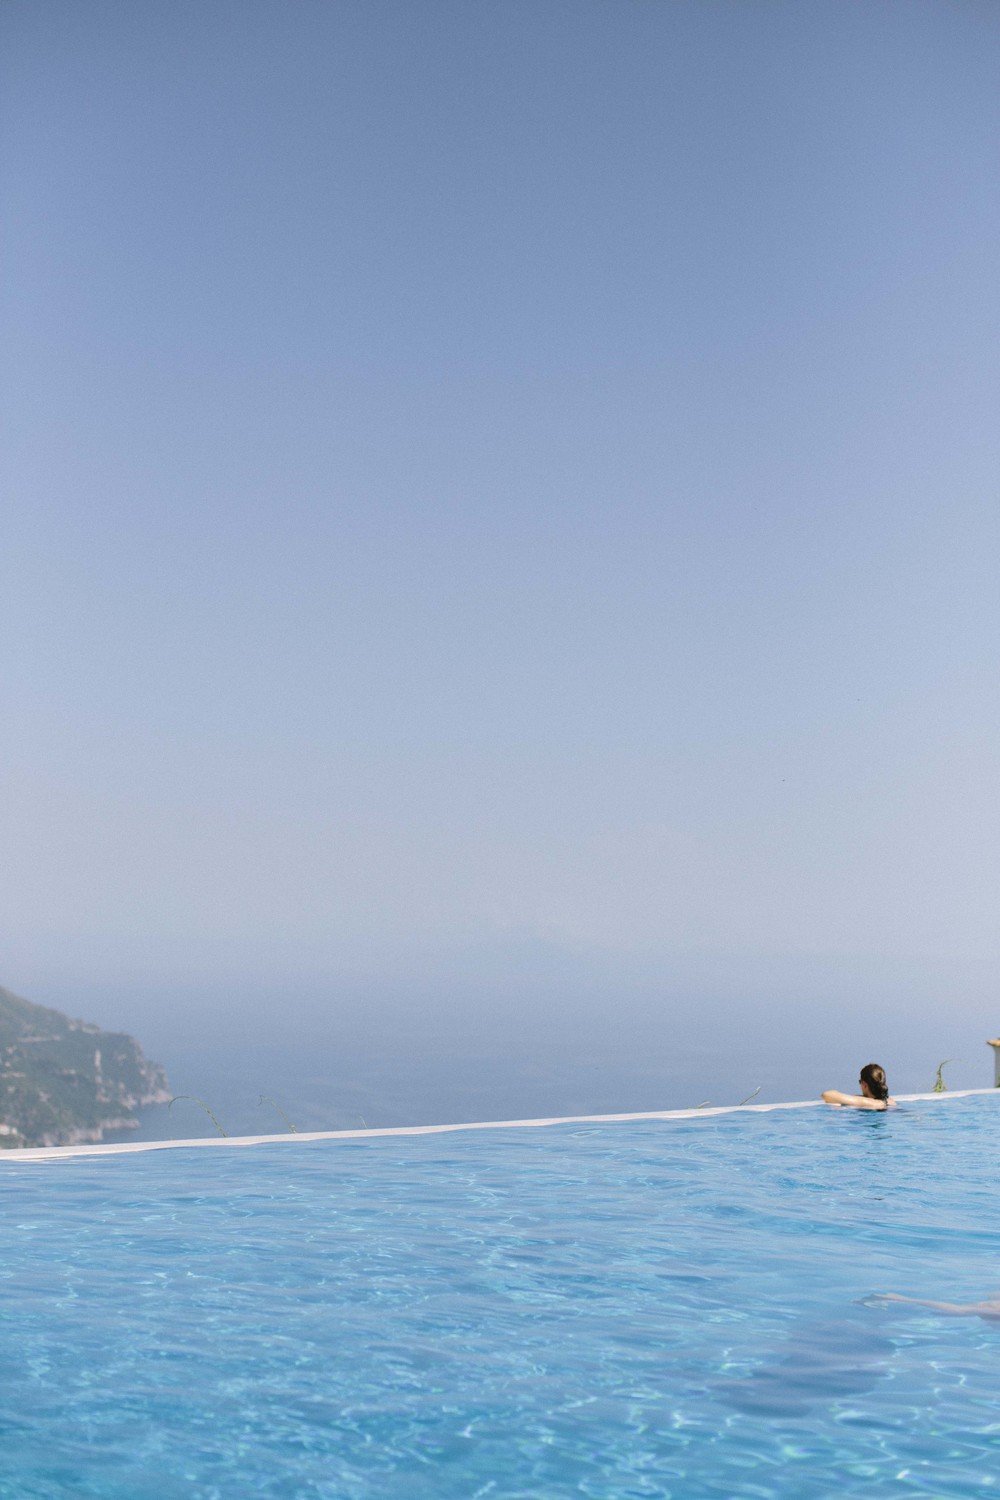 And Hotel Caruso boasts an infinity pool right into the ocean overlooking a cliff. Purely amazing!